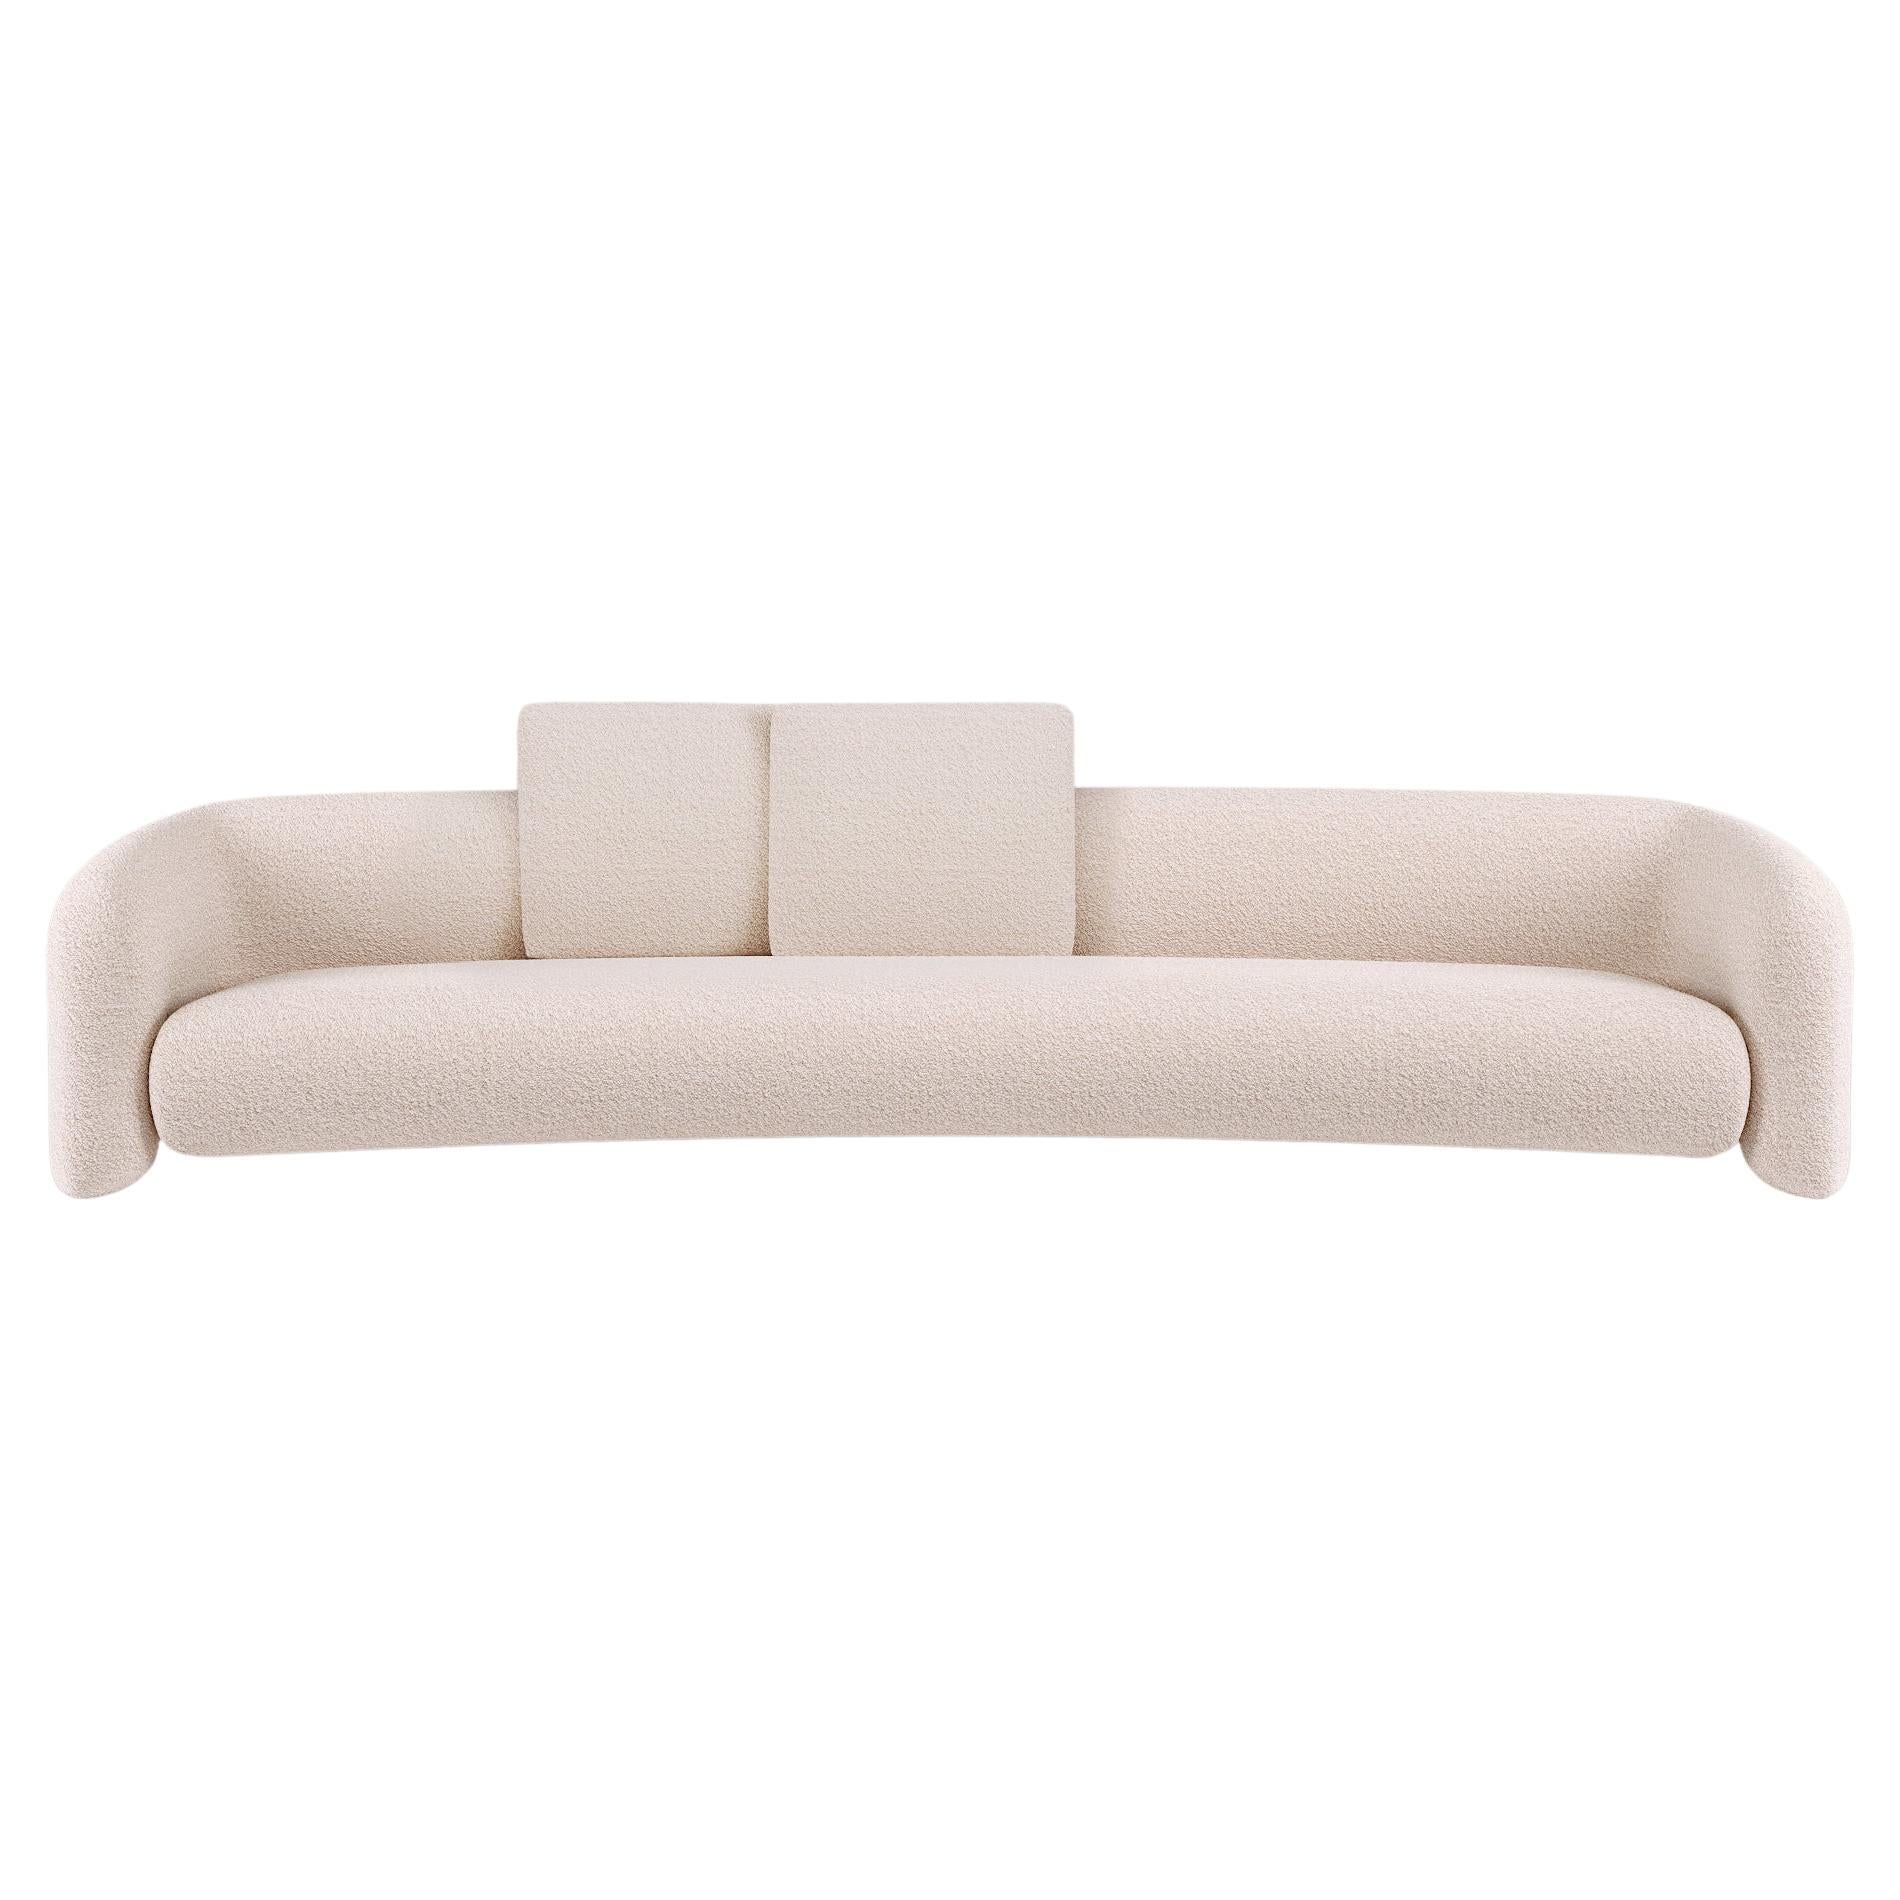 Bold Sofa Curved Open arms - M